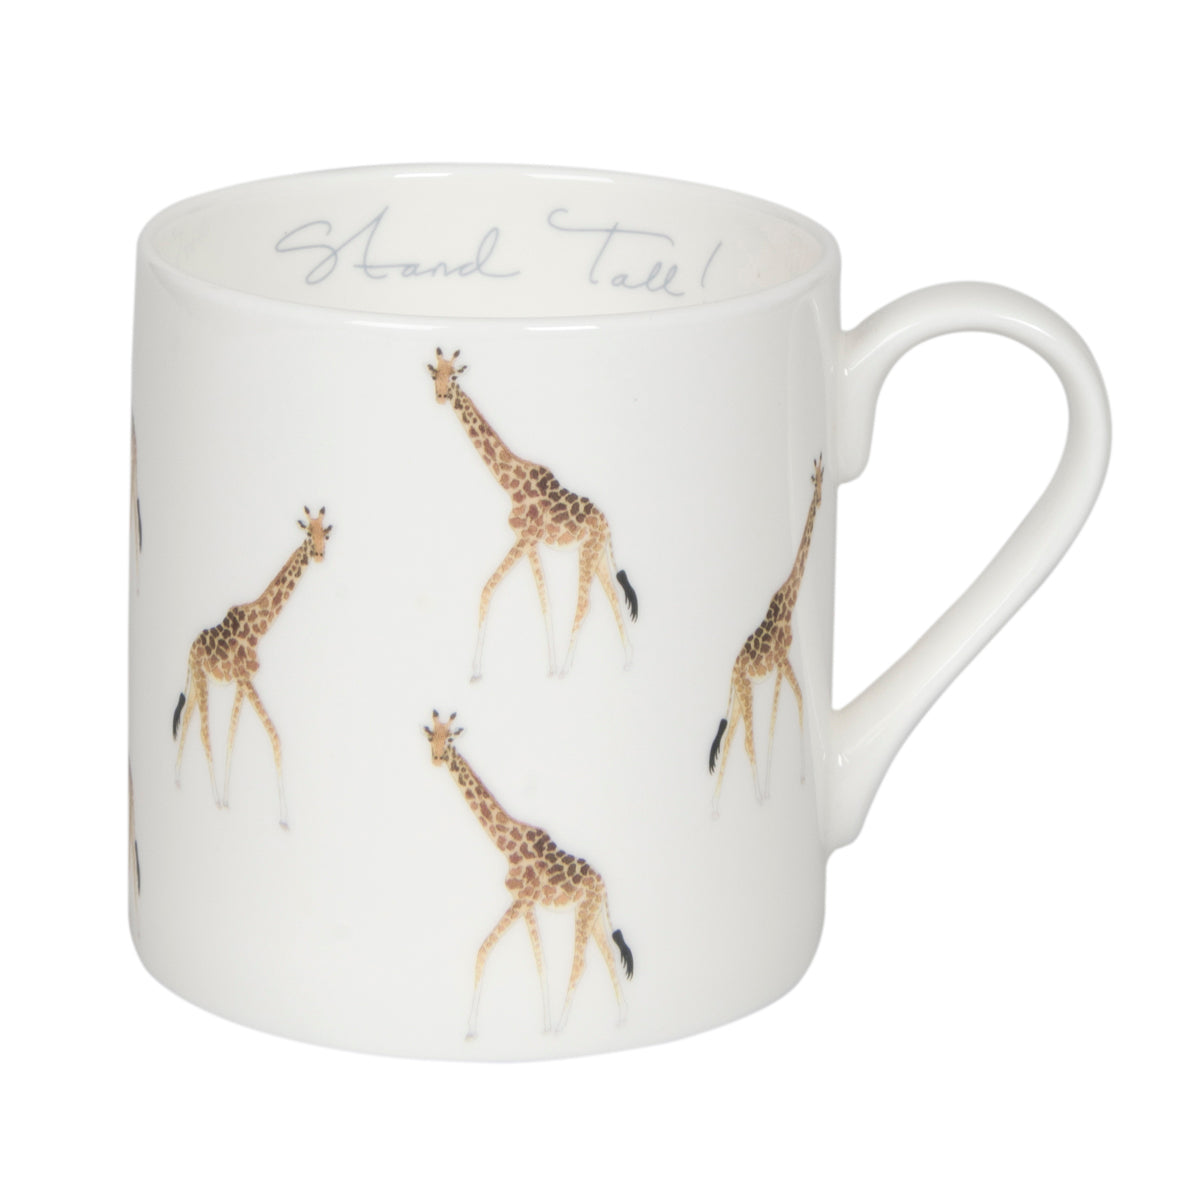 Giraffe Mug Large Stand Tall by Sophie Allport